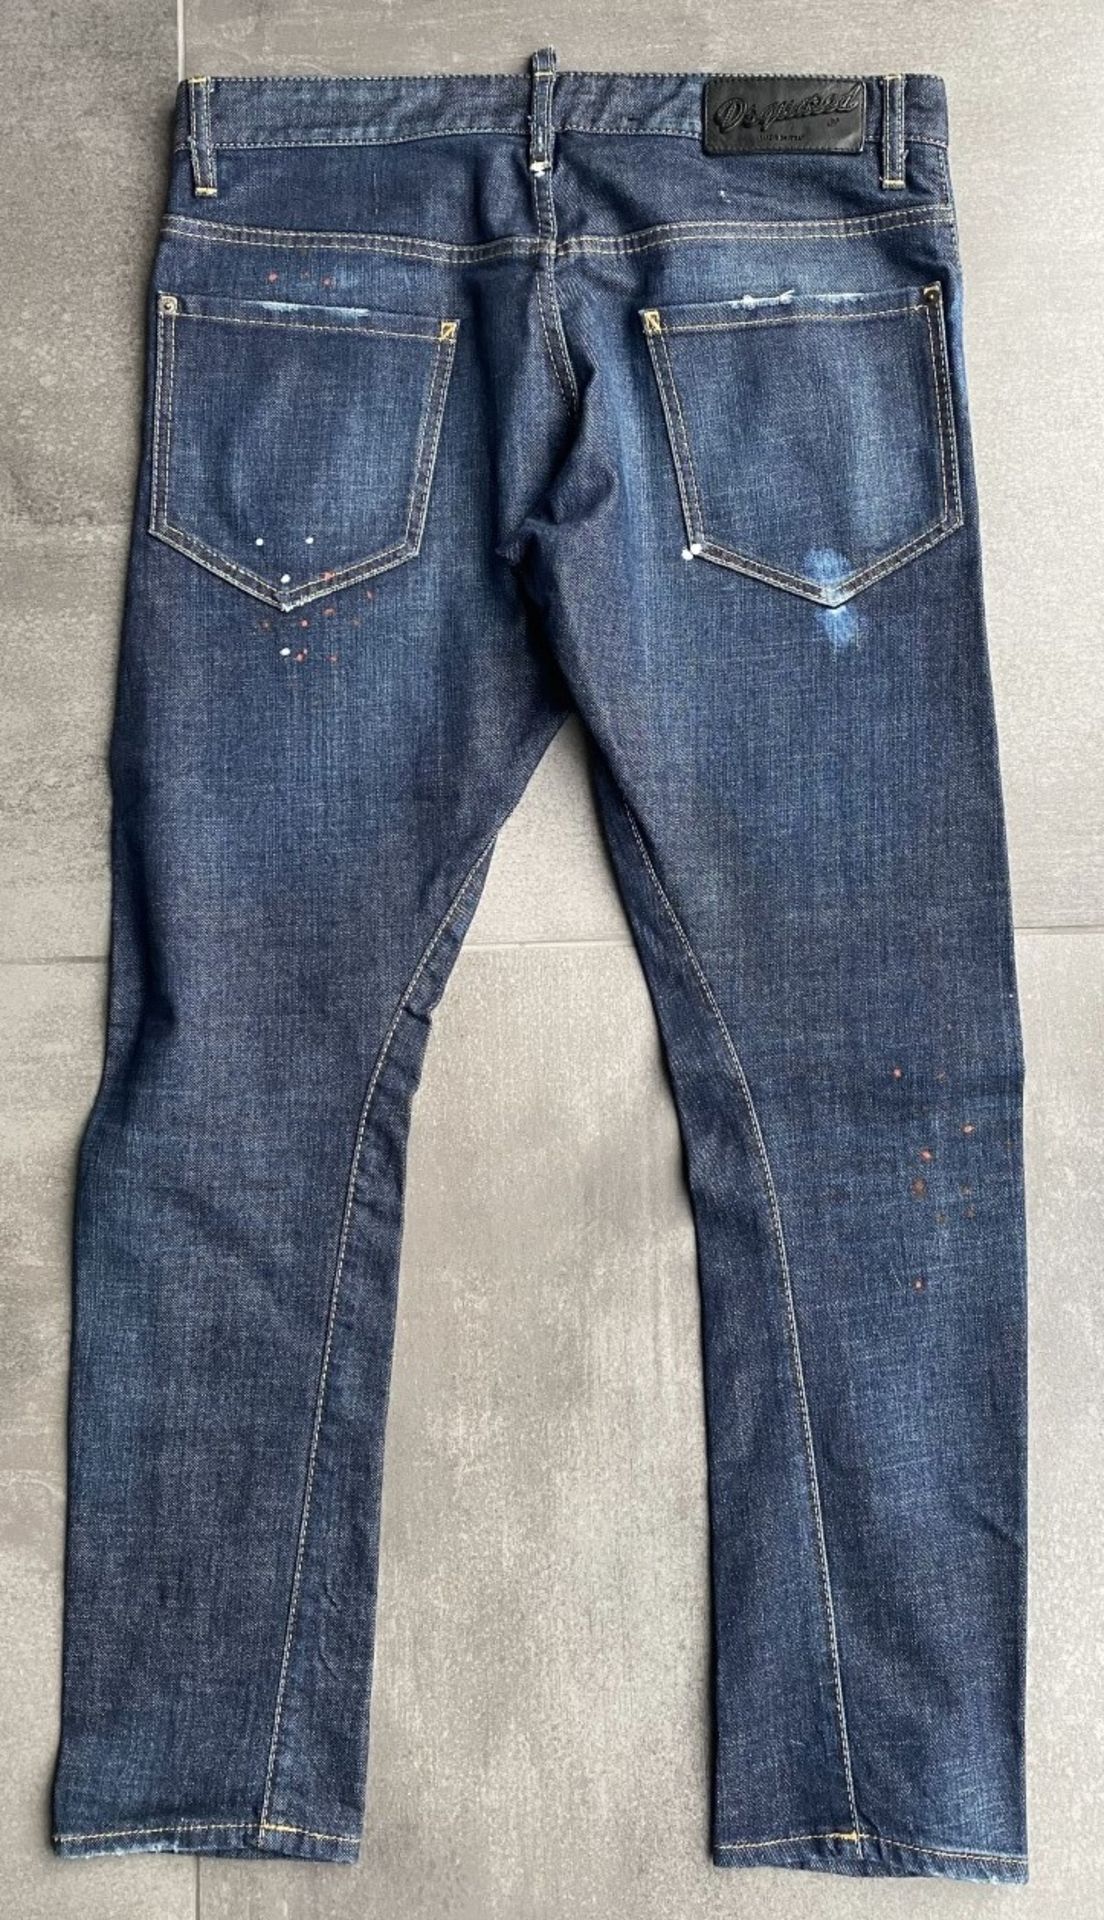 1 x Pair Of Men's Genuine Dsquared2 Jeans In Dark Blue - Size: 48 - Preowned In Very Good - Image 4 of 9